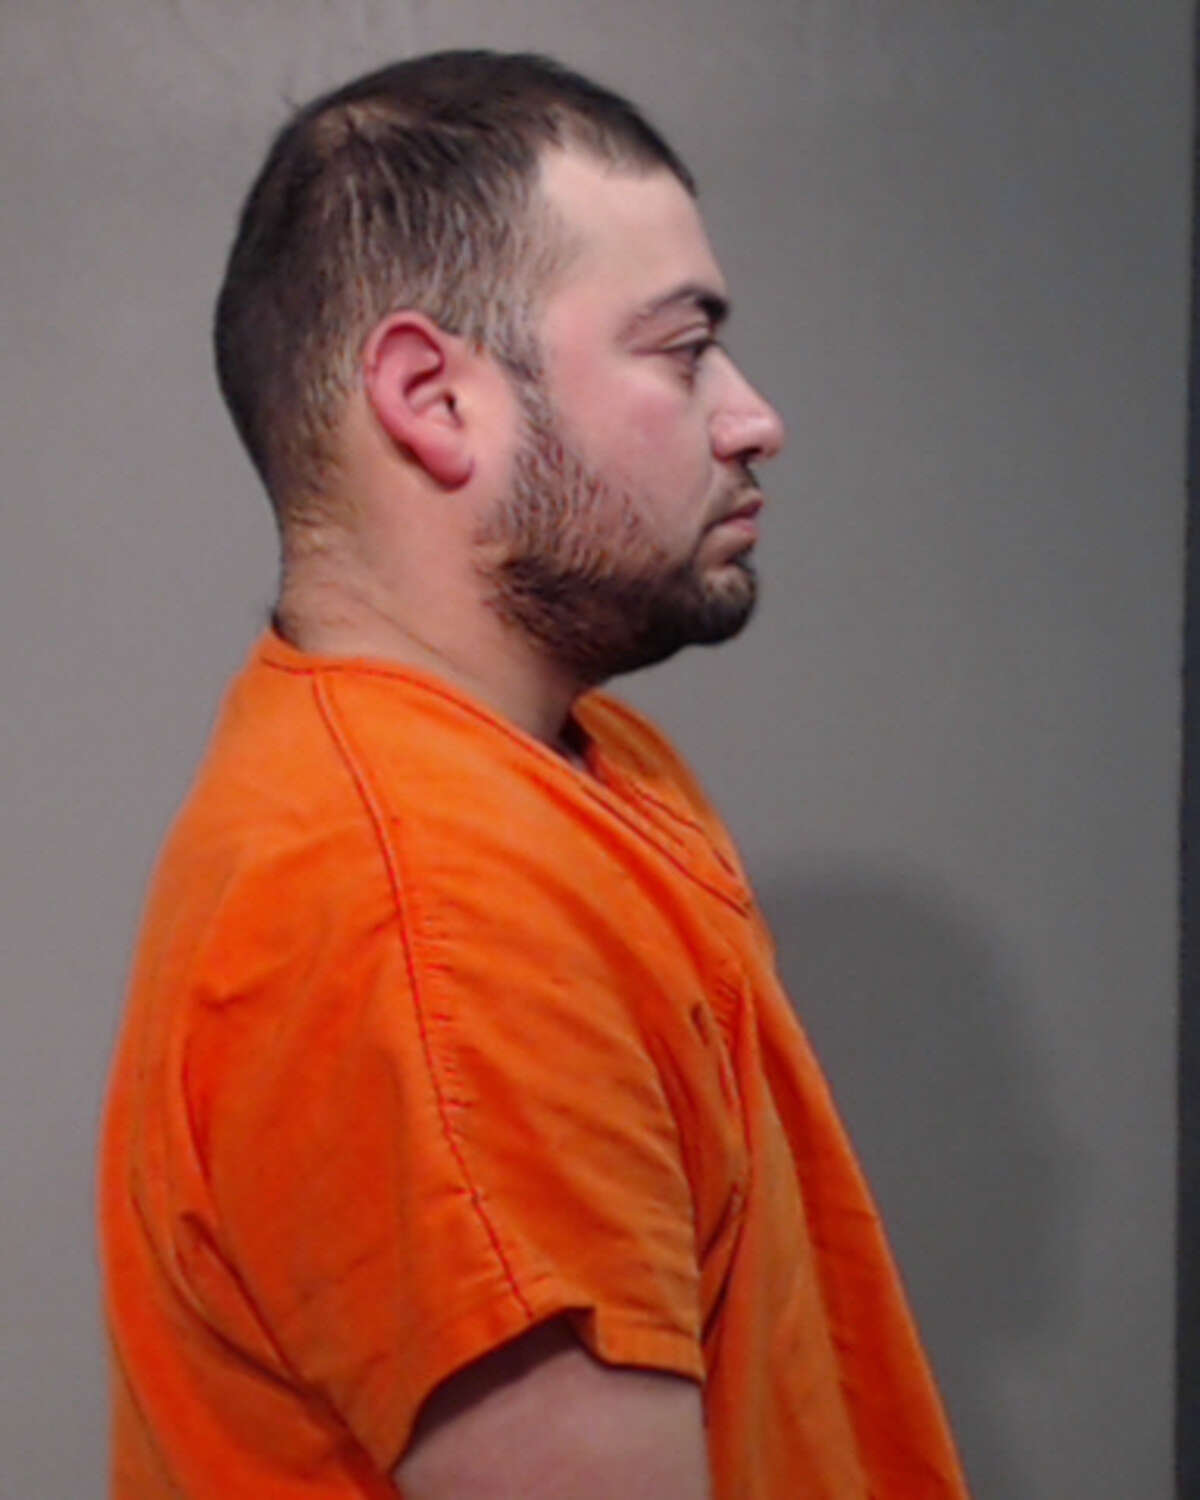 Michael Escobedo, a 30-year-old Harlingen man, faces two counts of criminally negligent homicide. He remains in the Hidalgo County Jail in lieu of $20,000 bond.